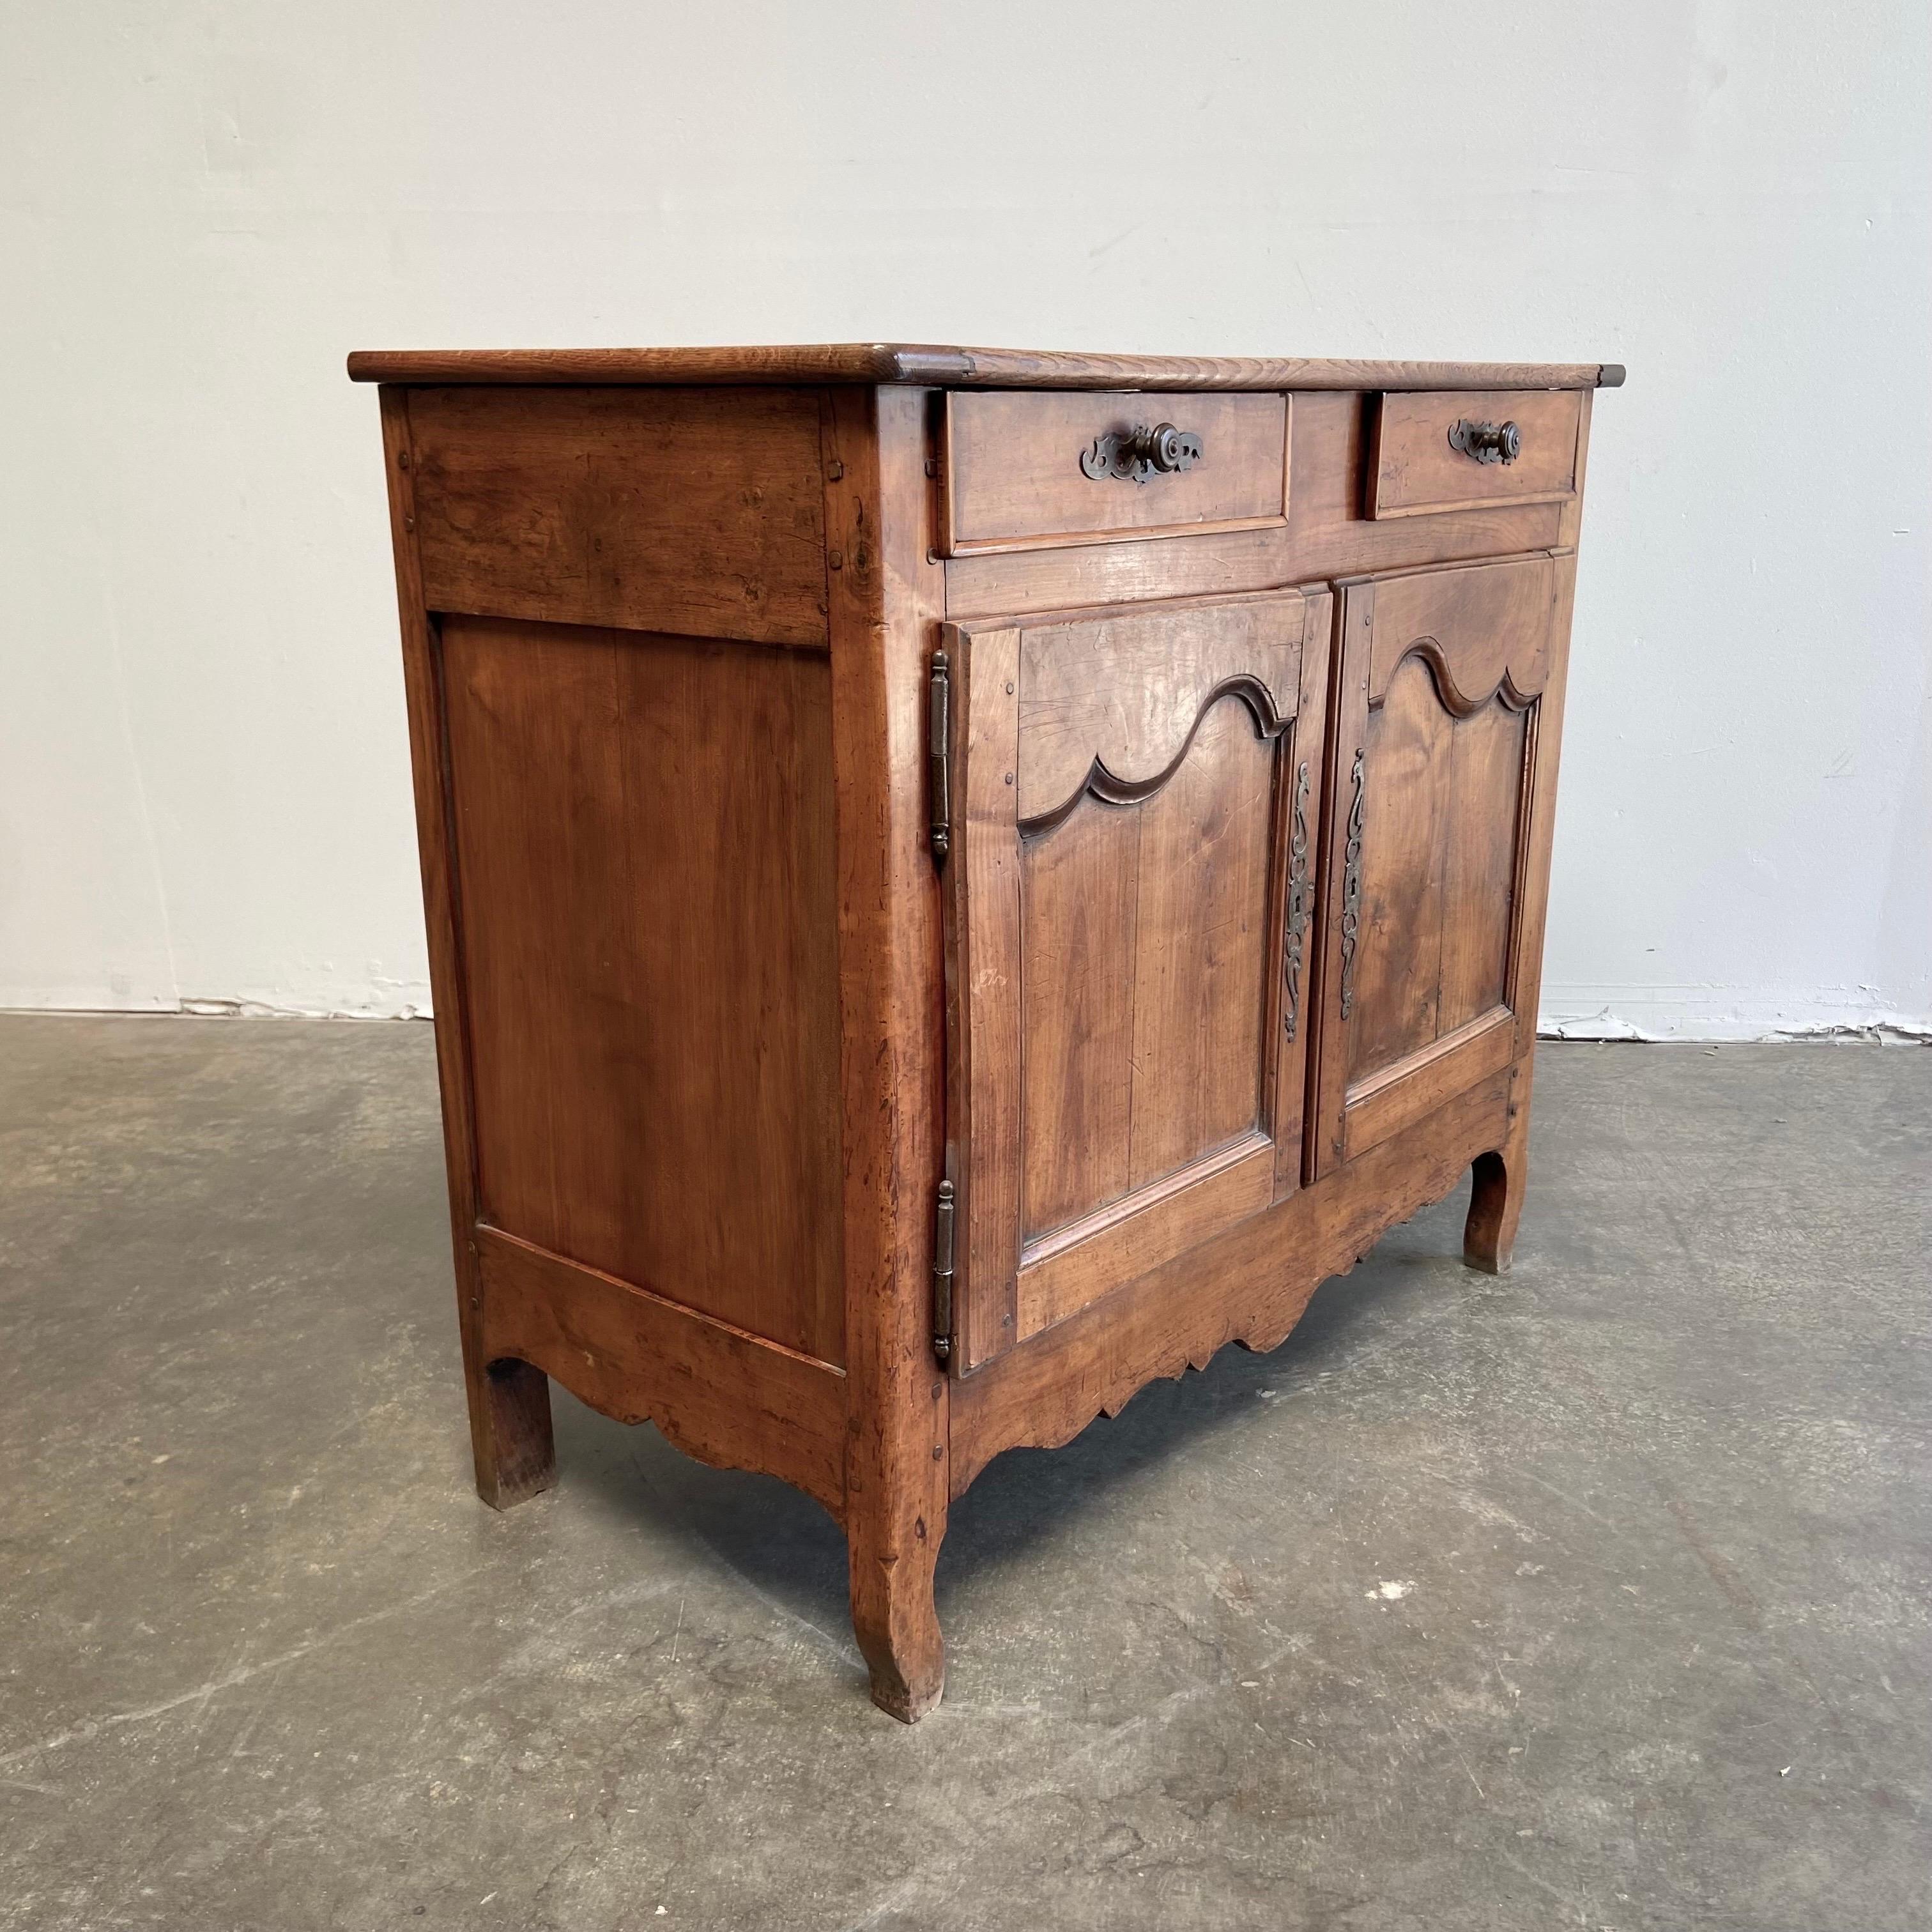 French Early 19th Century Transition Style Walnut Buffet with Doors and Drawers For Sale 6